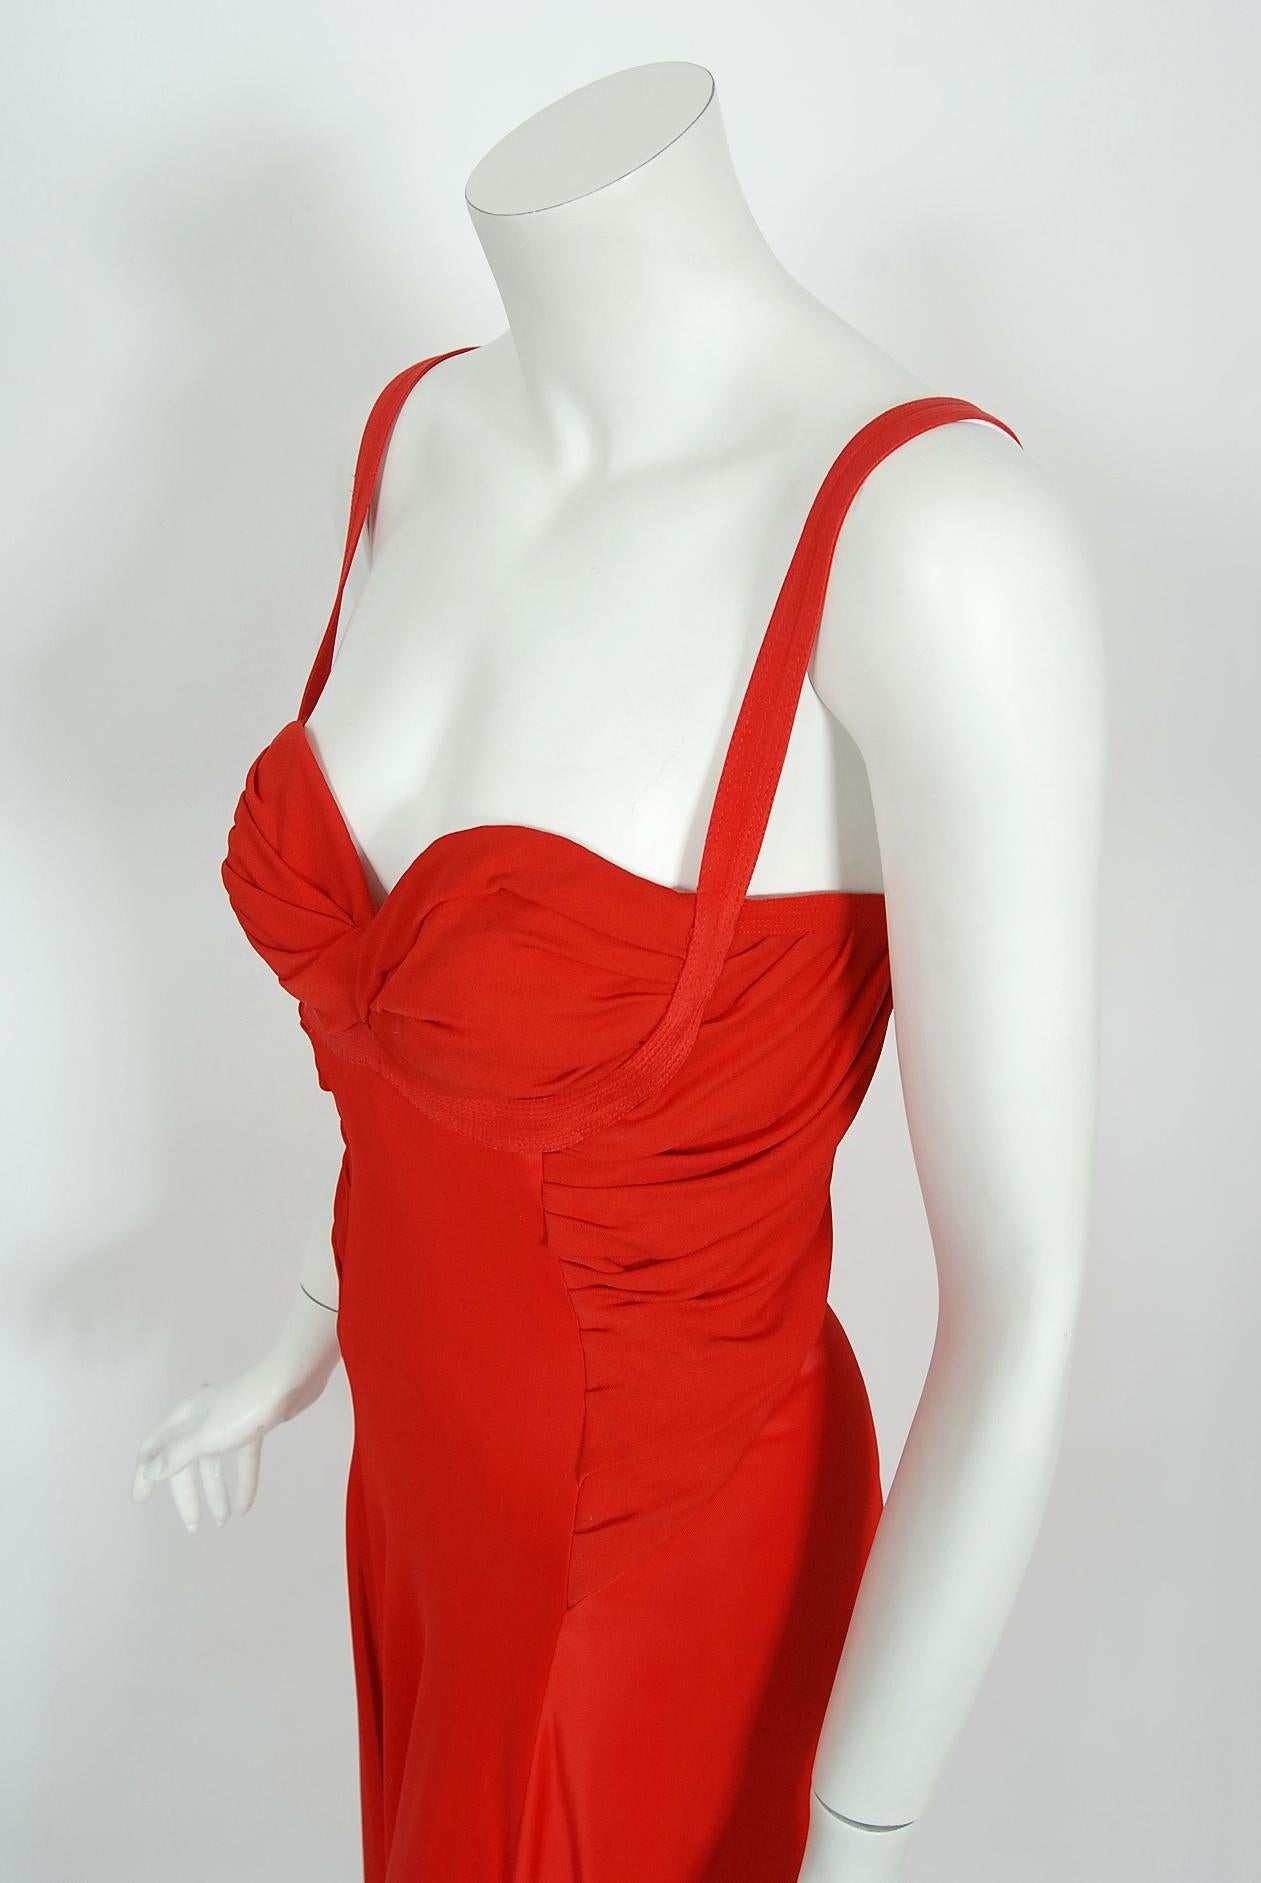 Women's Vintage 1993 Gianni Versace Couture Documented Red Silk Bustier High-Slits Gown